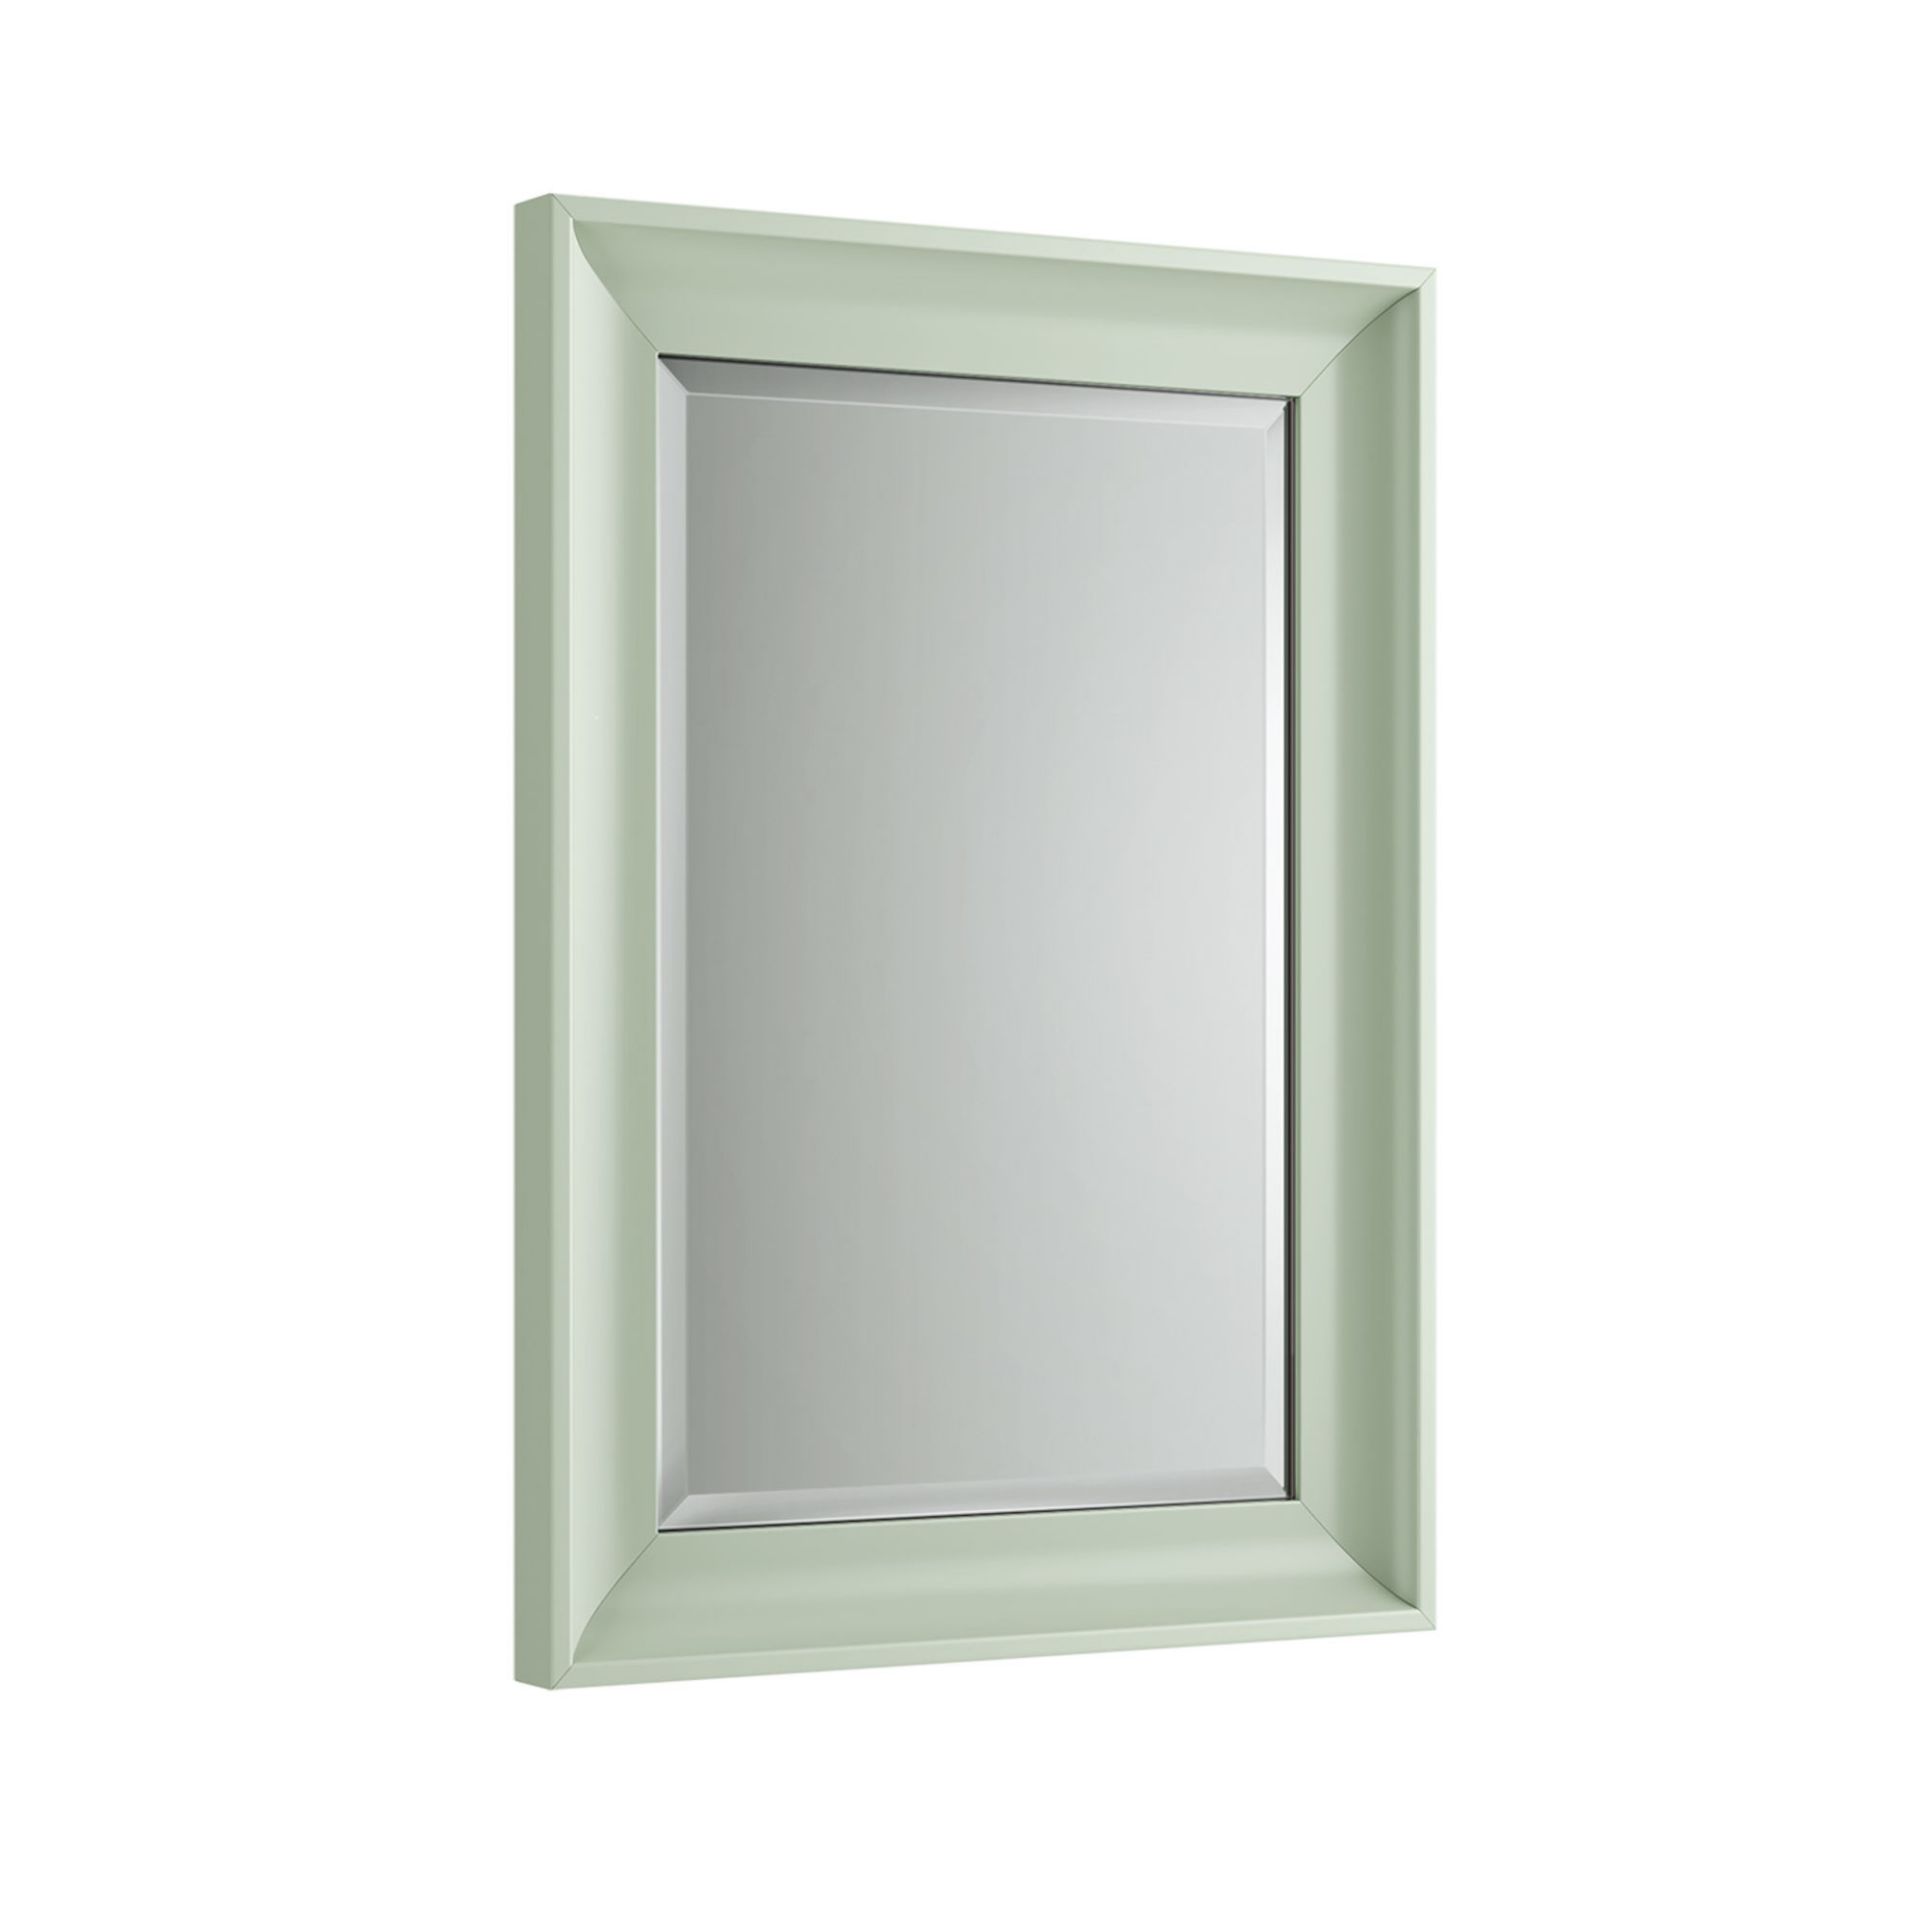 (AA118) 700x500mm Melbourne Garden Sage Framed Mirror Adds a funky, stylish look to your bathr...